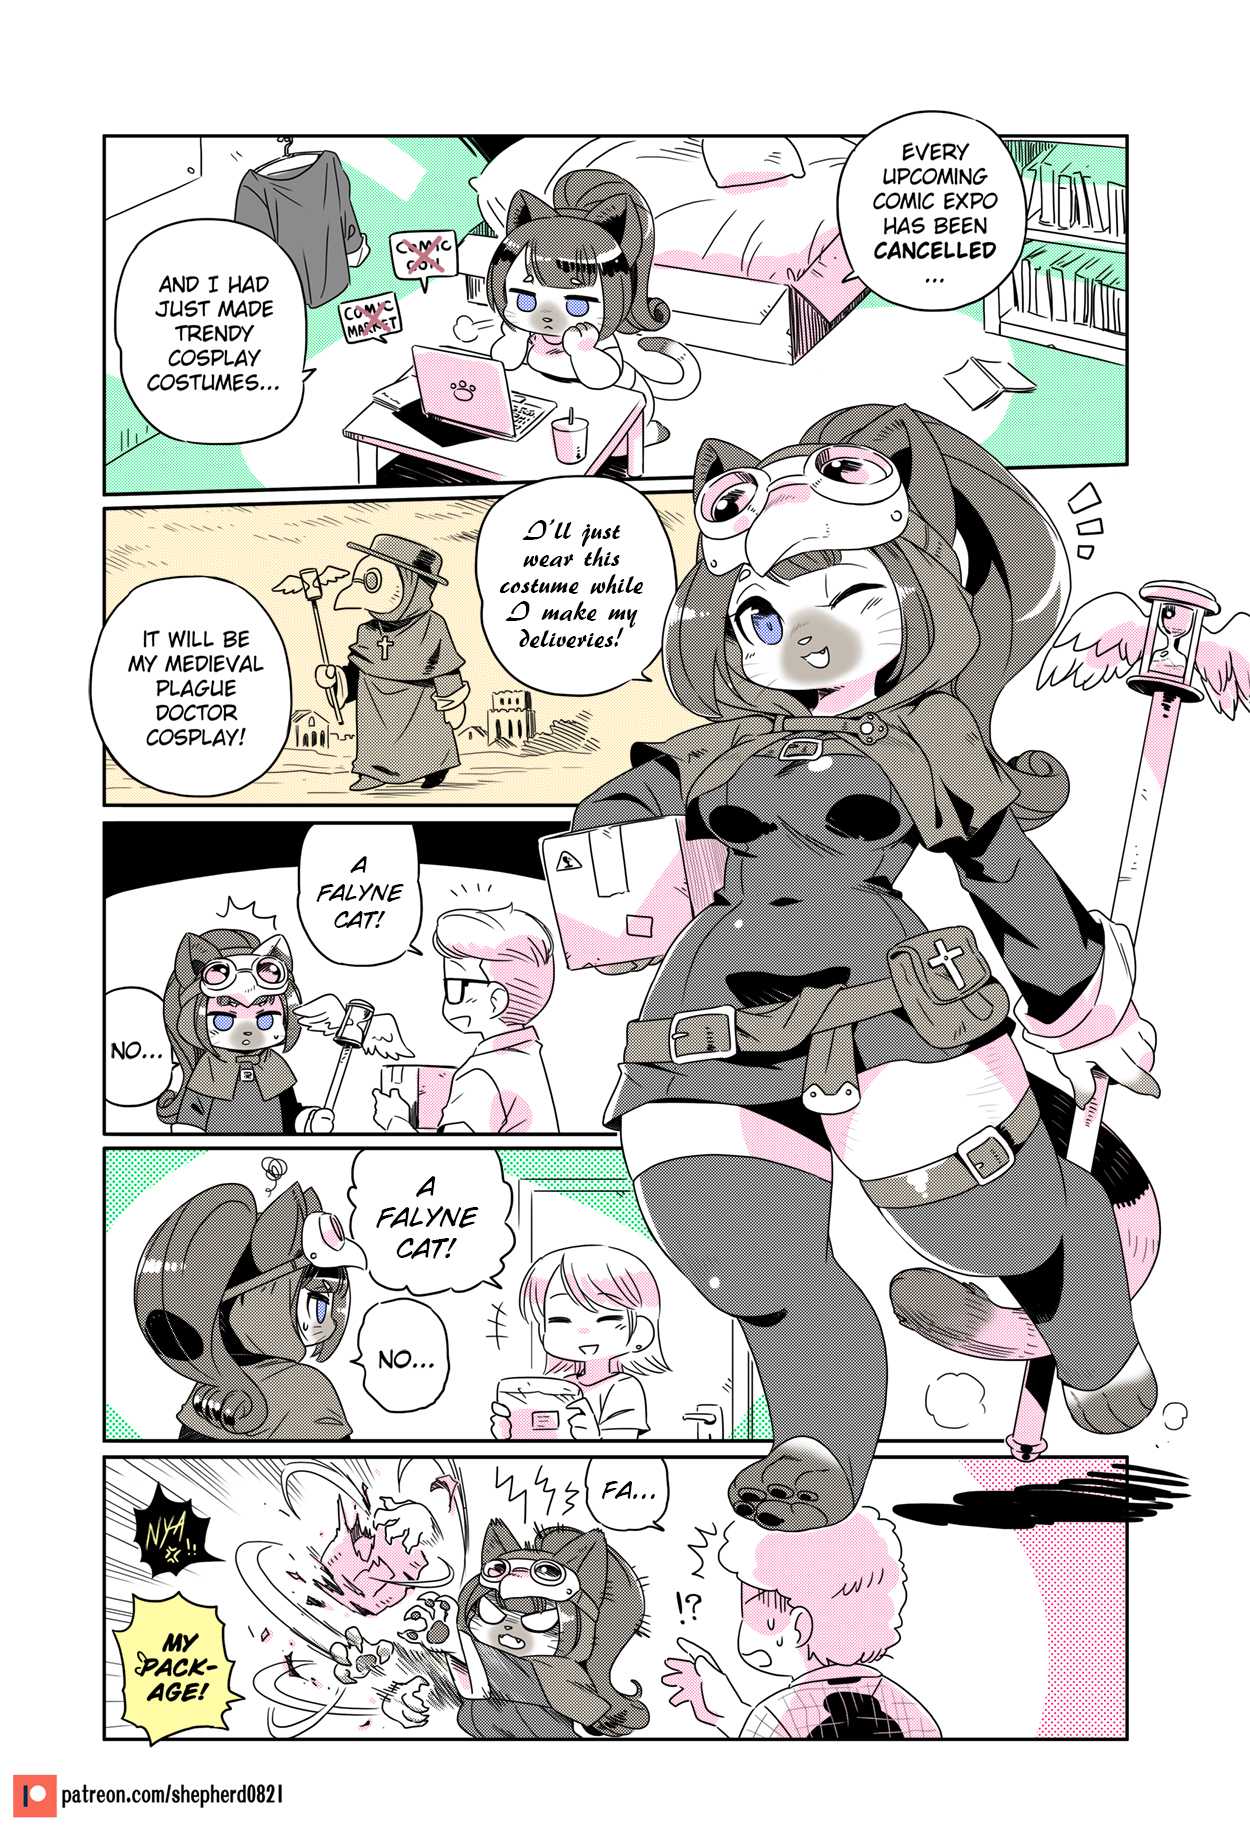 Modern MoGal Ch. 101 Judging Kitty By Appearance